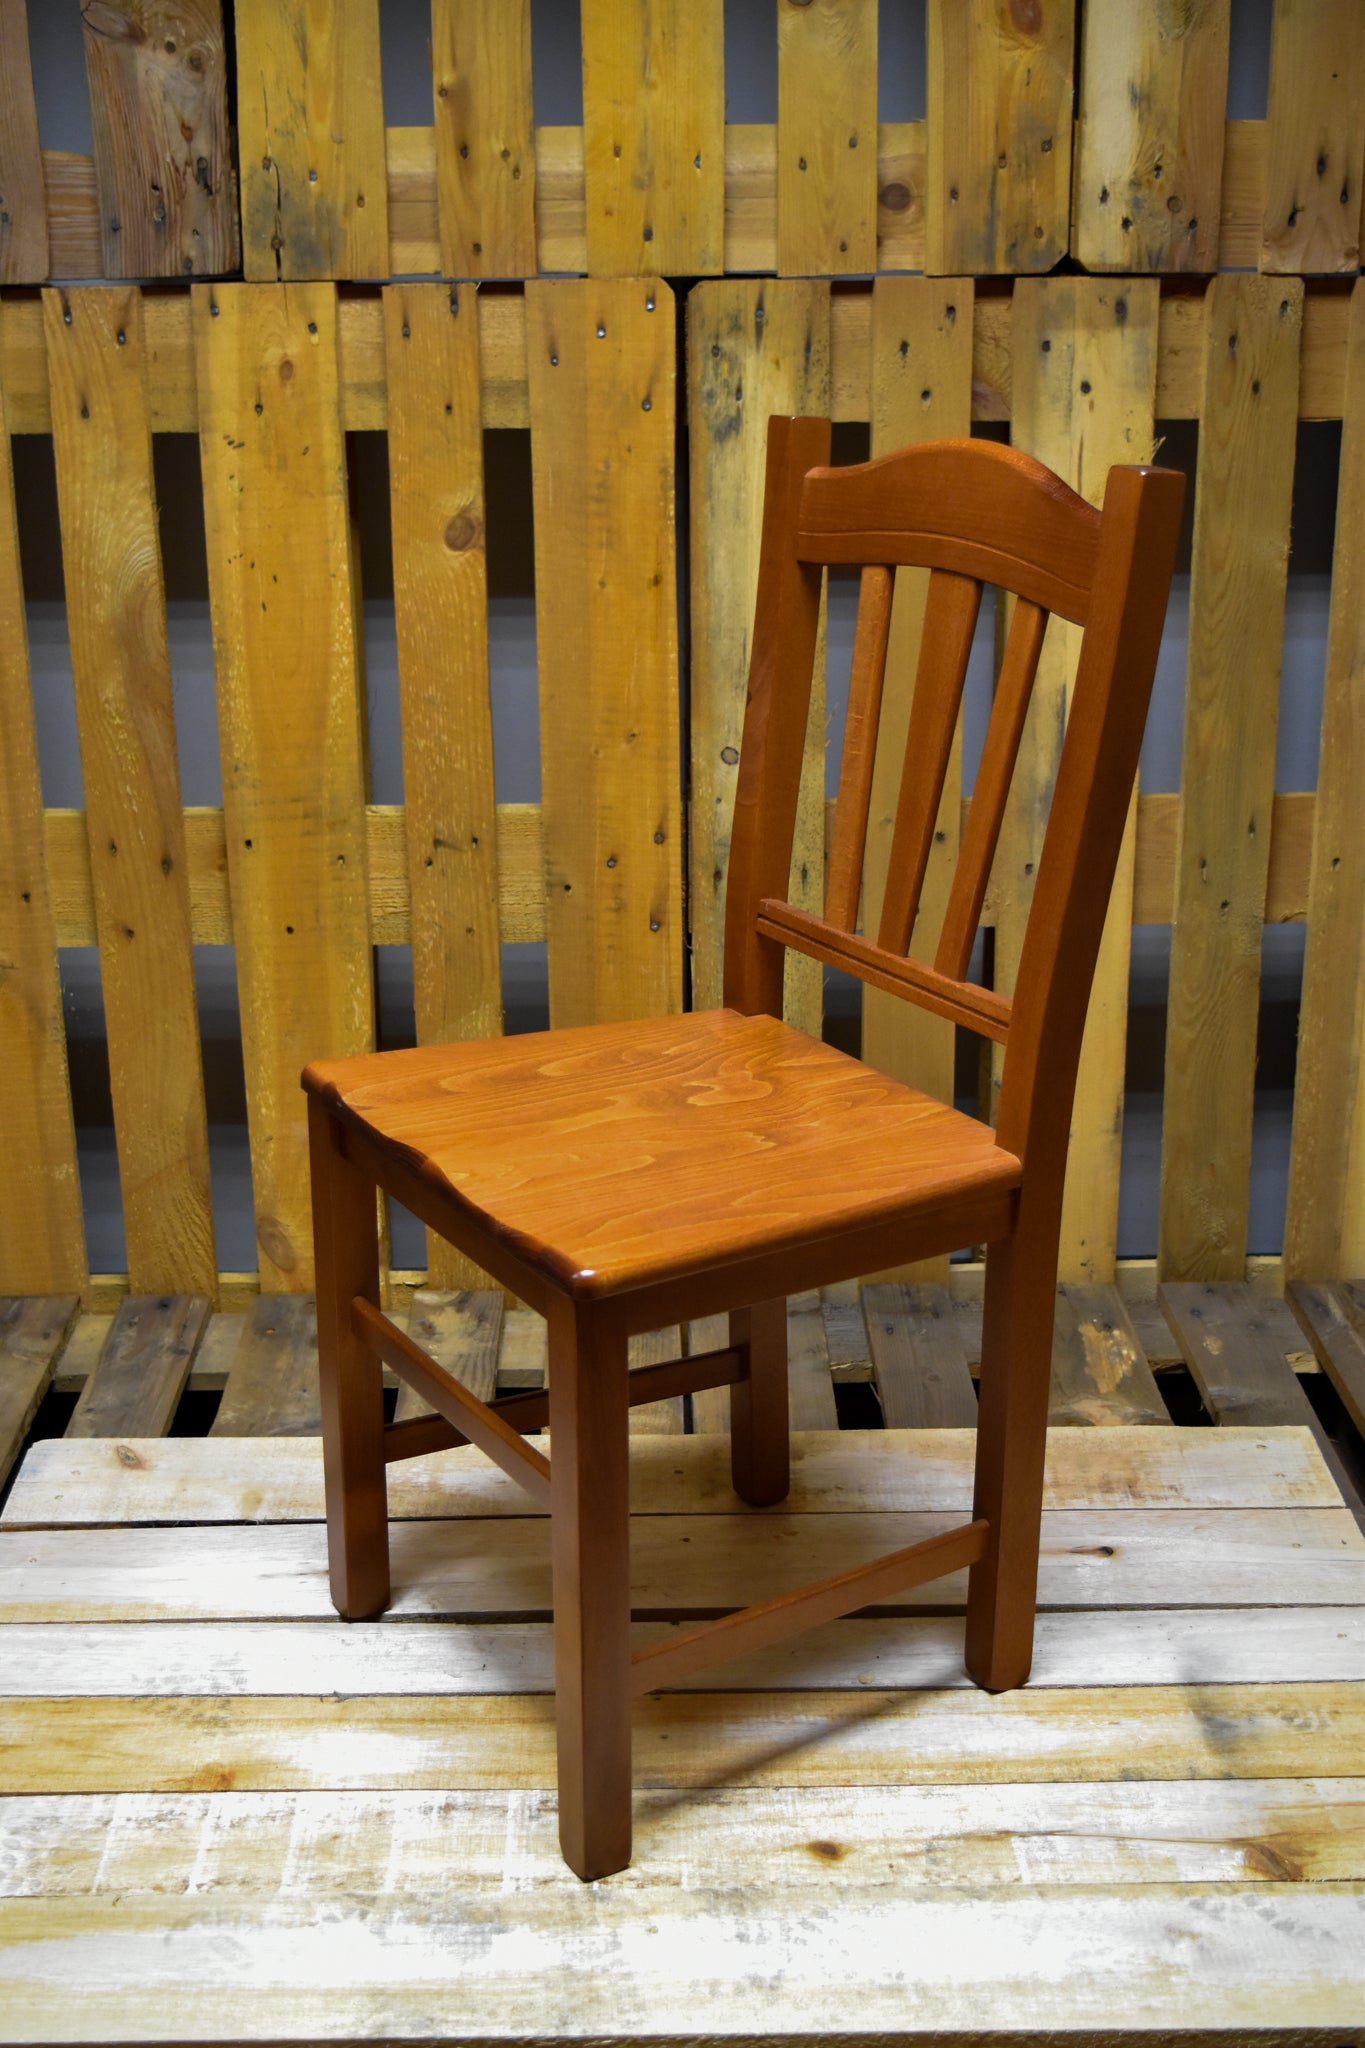 Stock chairs model 21 walnut color wooden seat